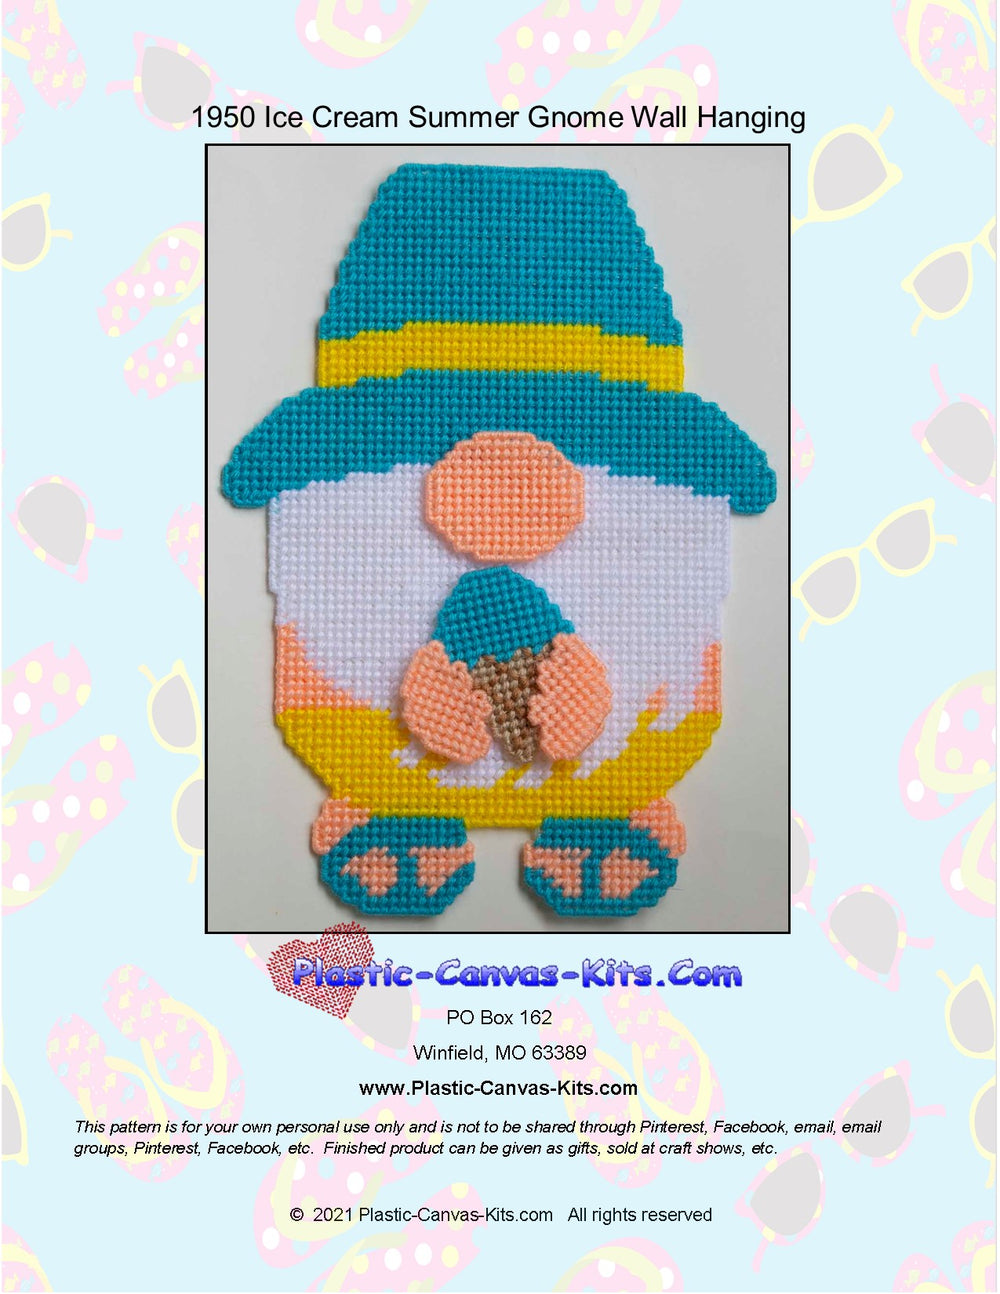 Summer Gnome with Ice Cream Wall Hanging